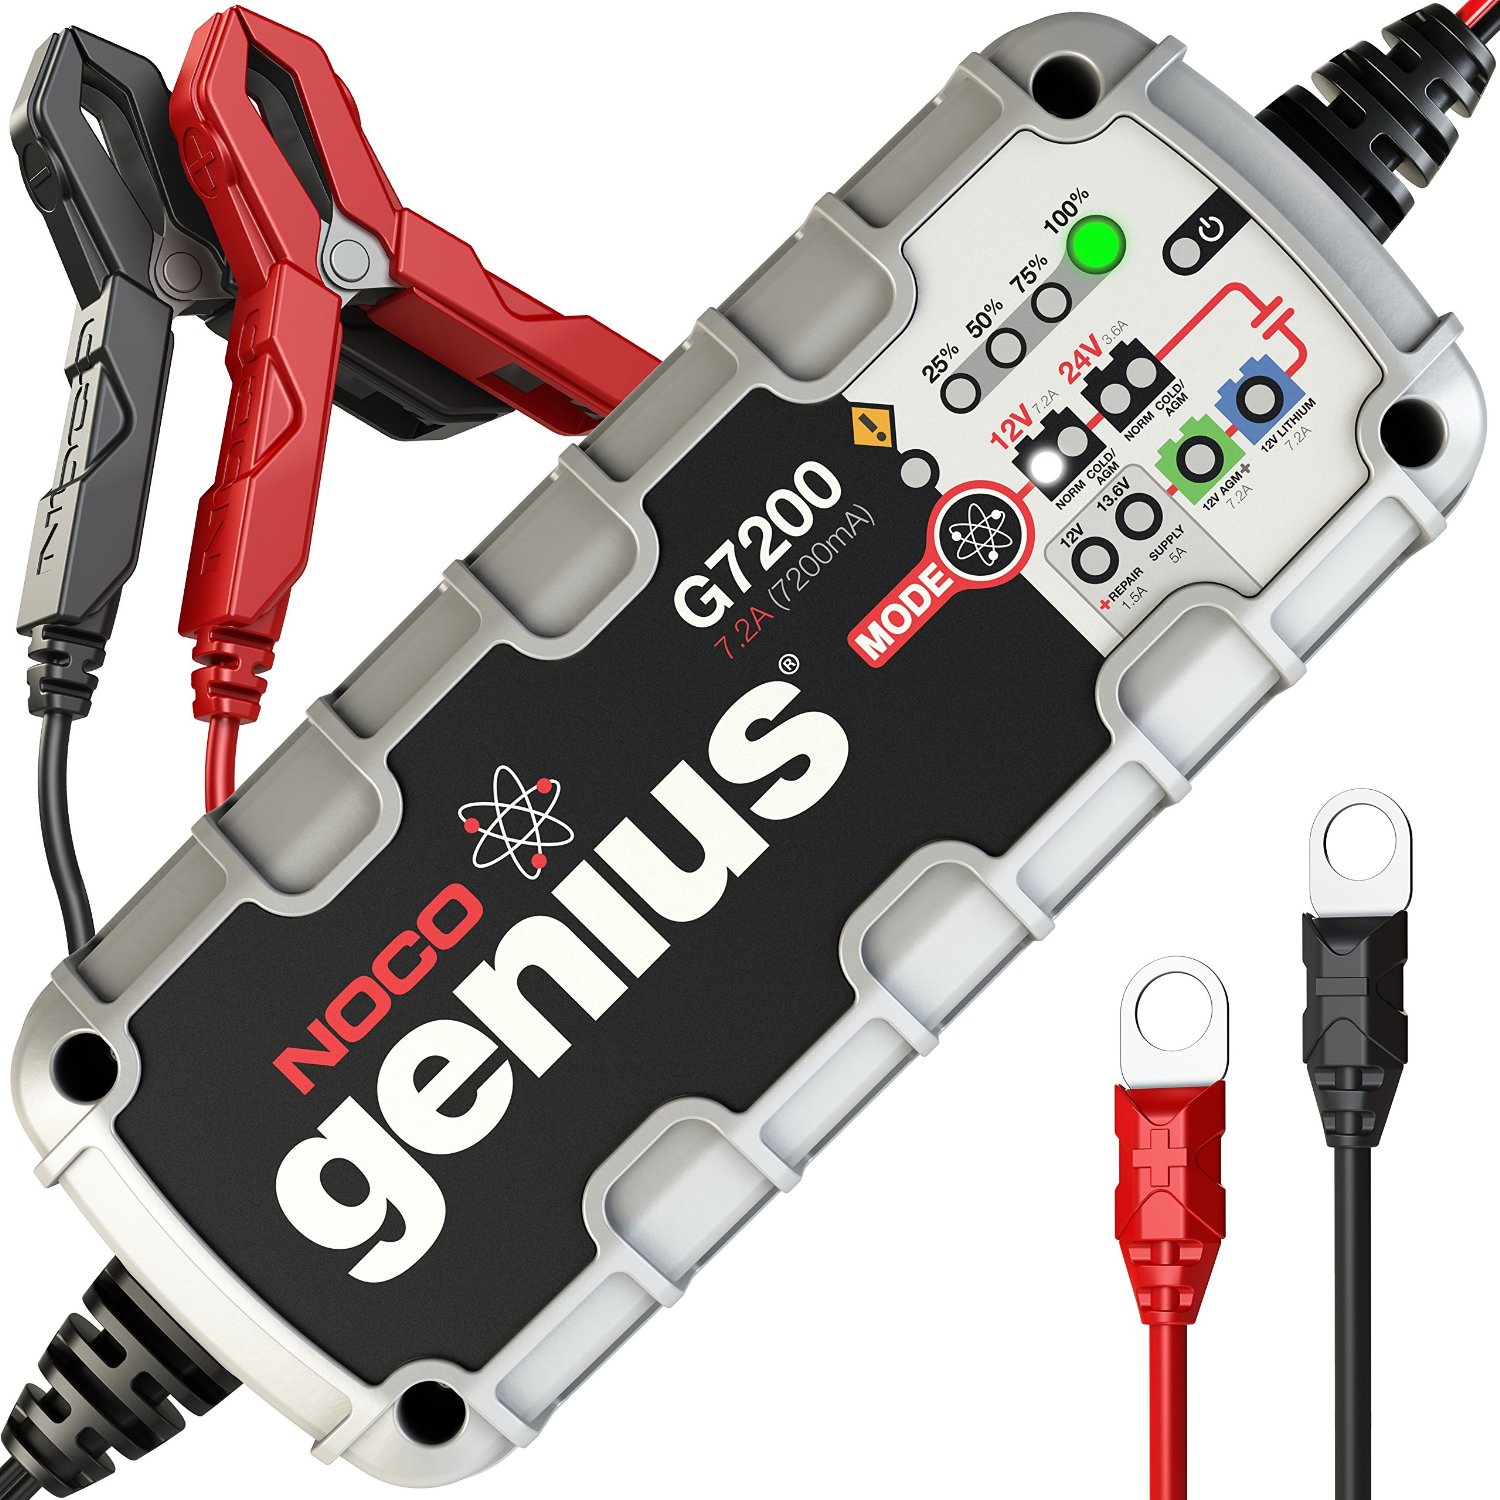 NOCO G7200 charger